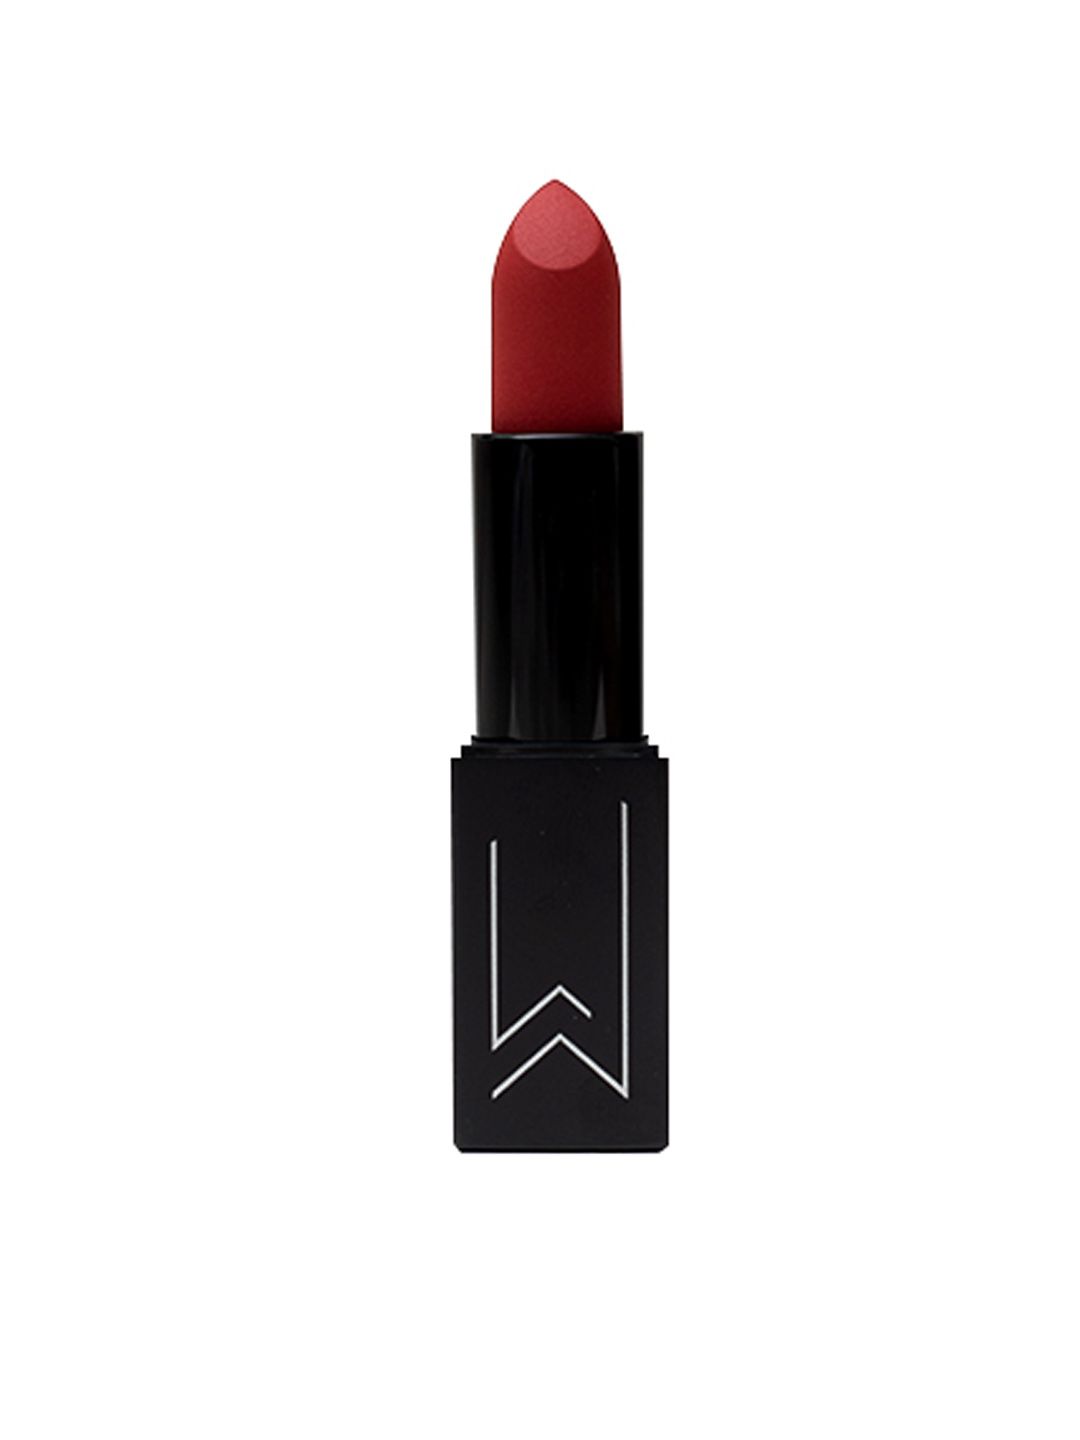 PAC Long Lasting Full Pigment Matte Mischief Lipstick - Play Date 04 Price in India